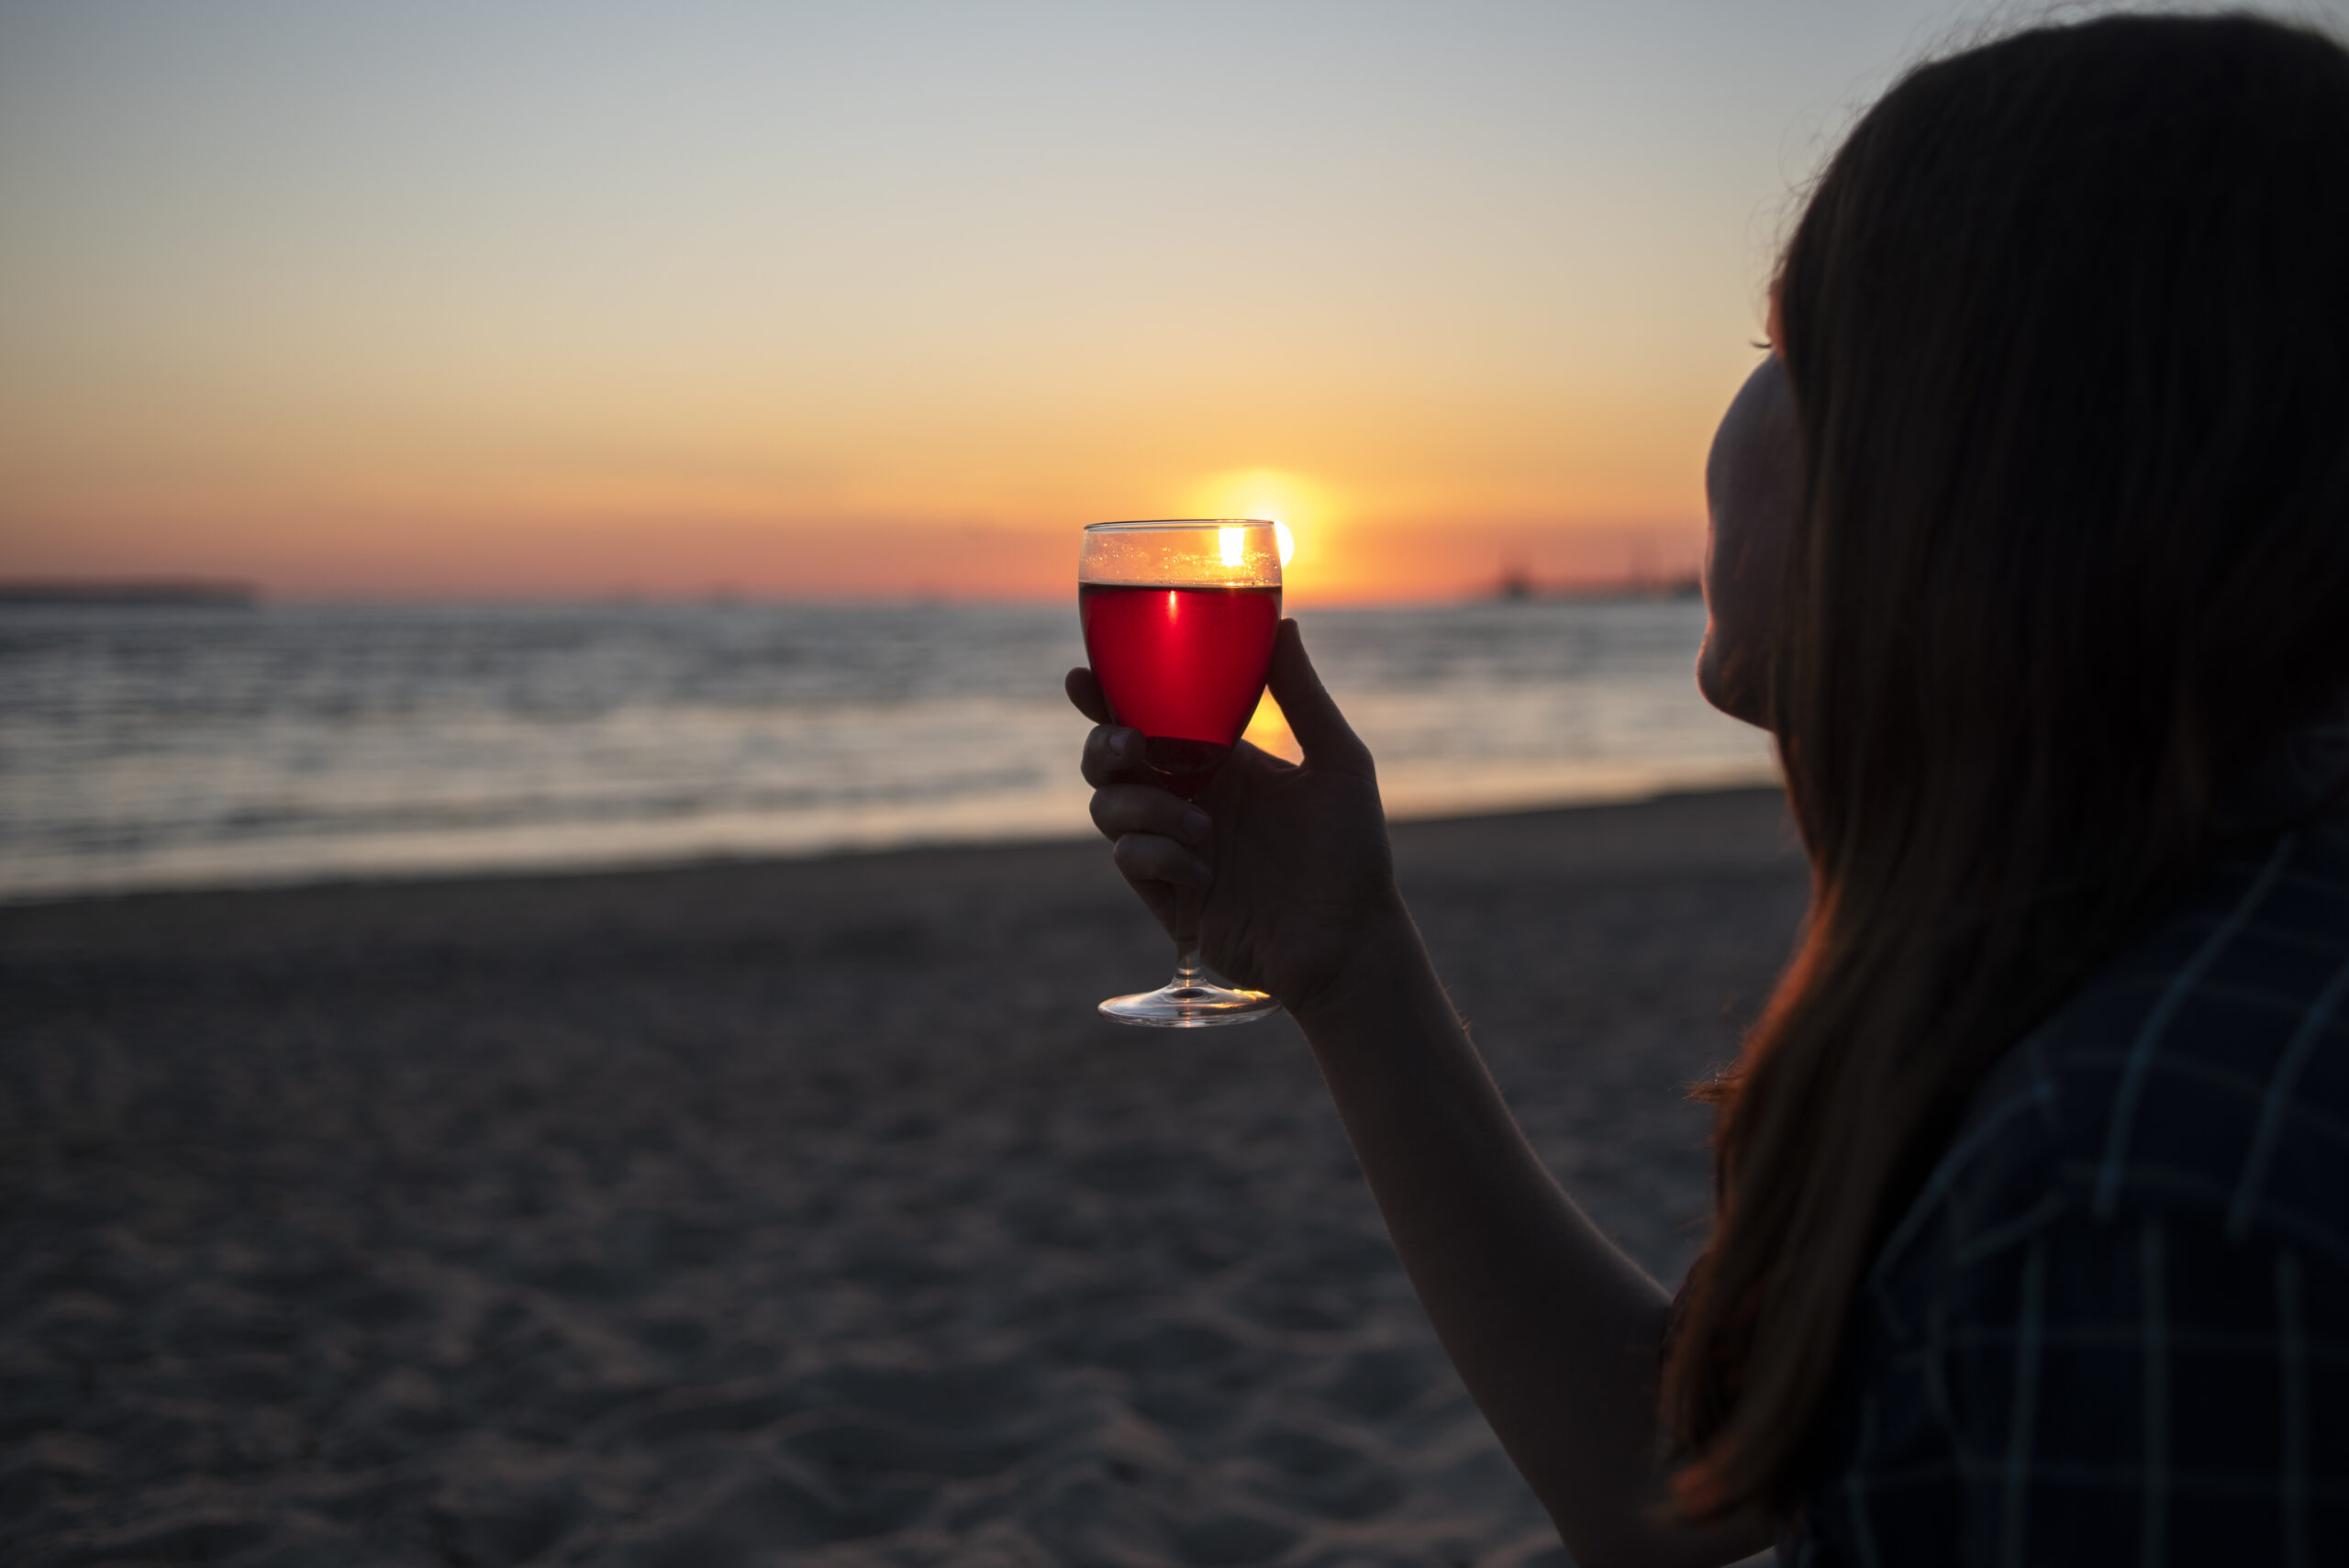 Photo of a woman's silhouette at dusk on the beach, holding a red wine glass just in front of the sun, making the red wine bright and lit up.